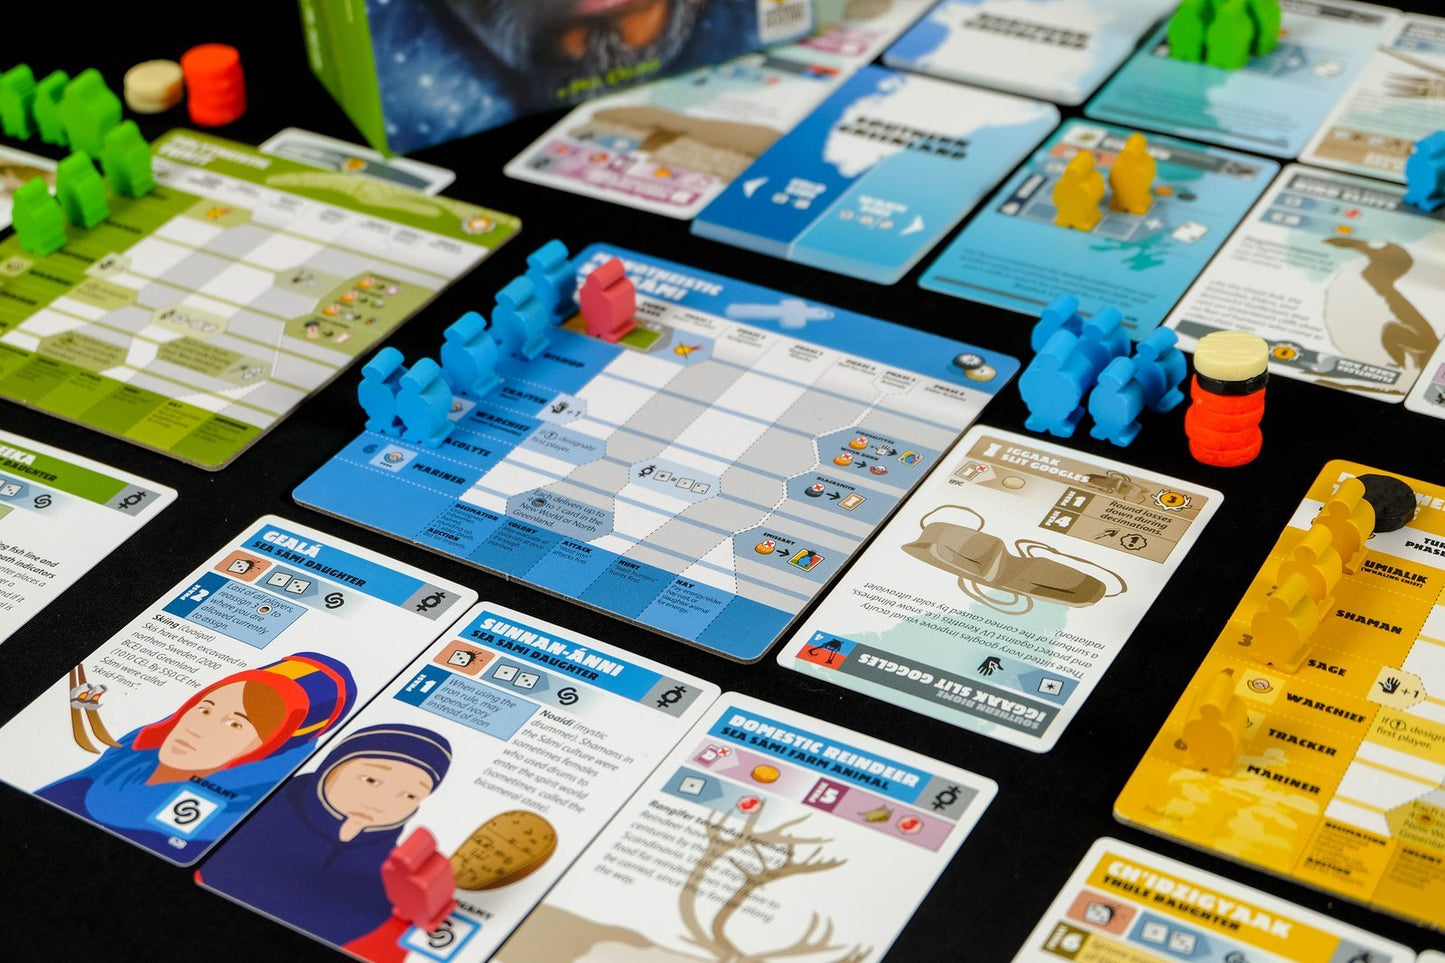 Greenland board game character cards and character figurines arranged in a playing position on a table